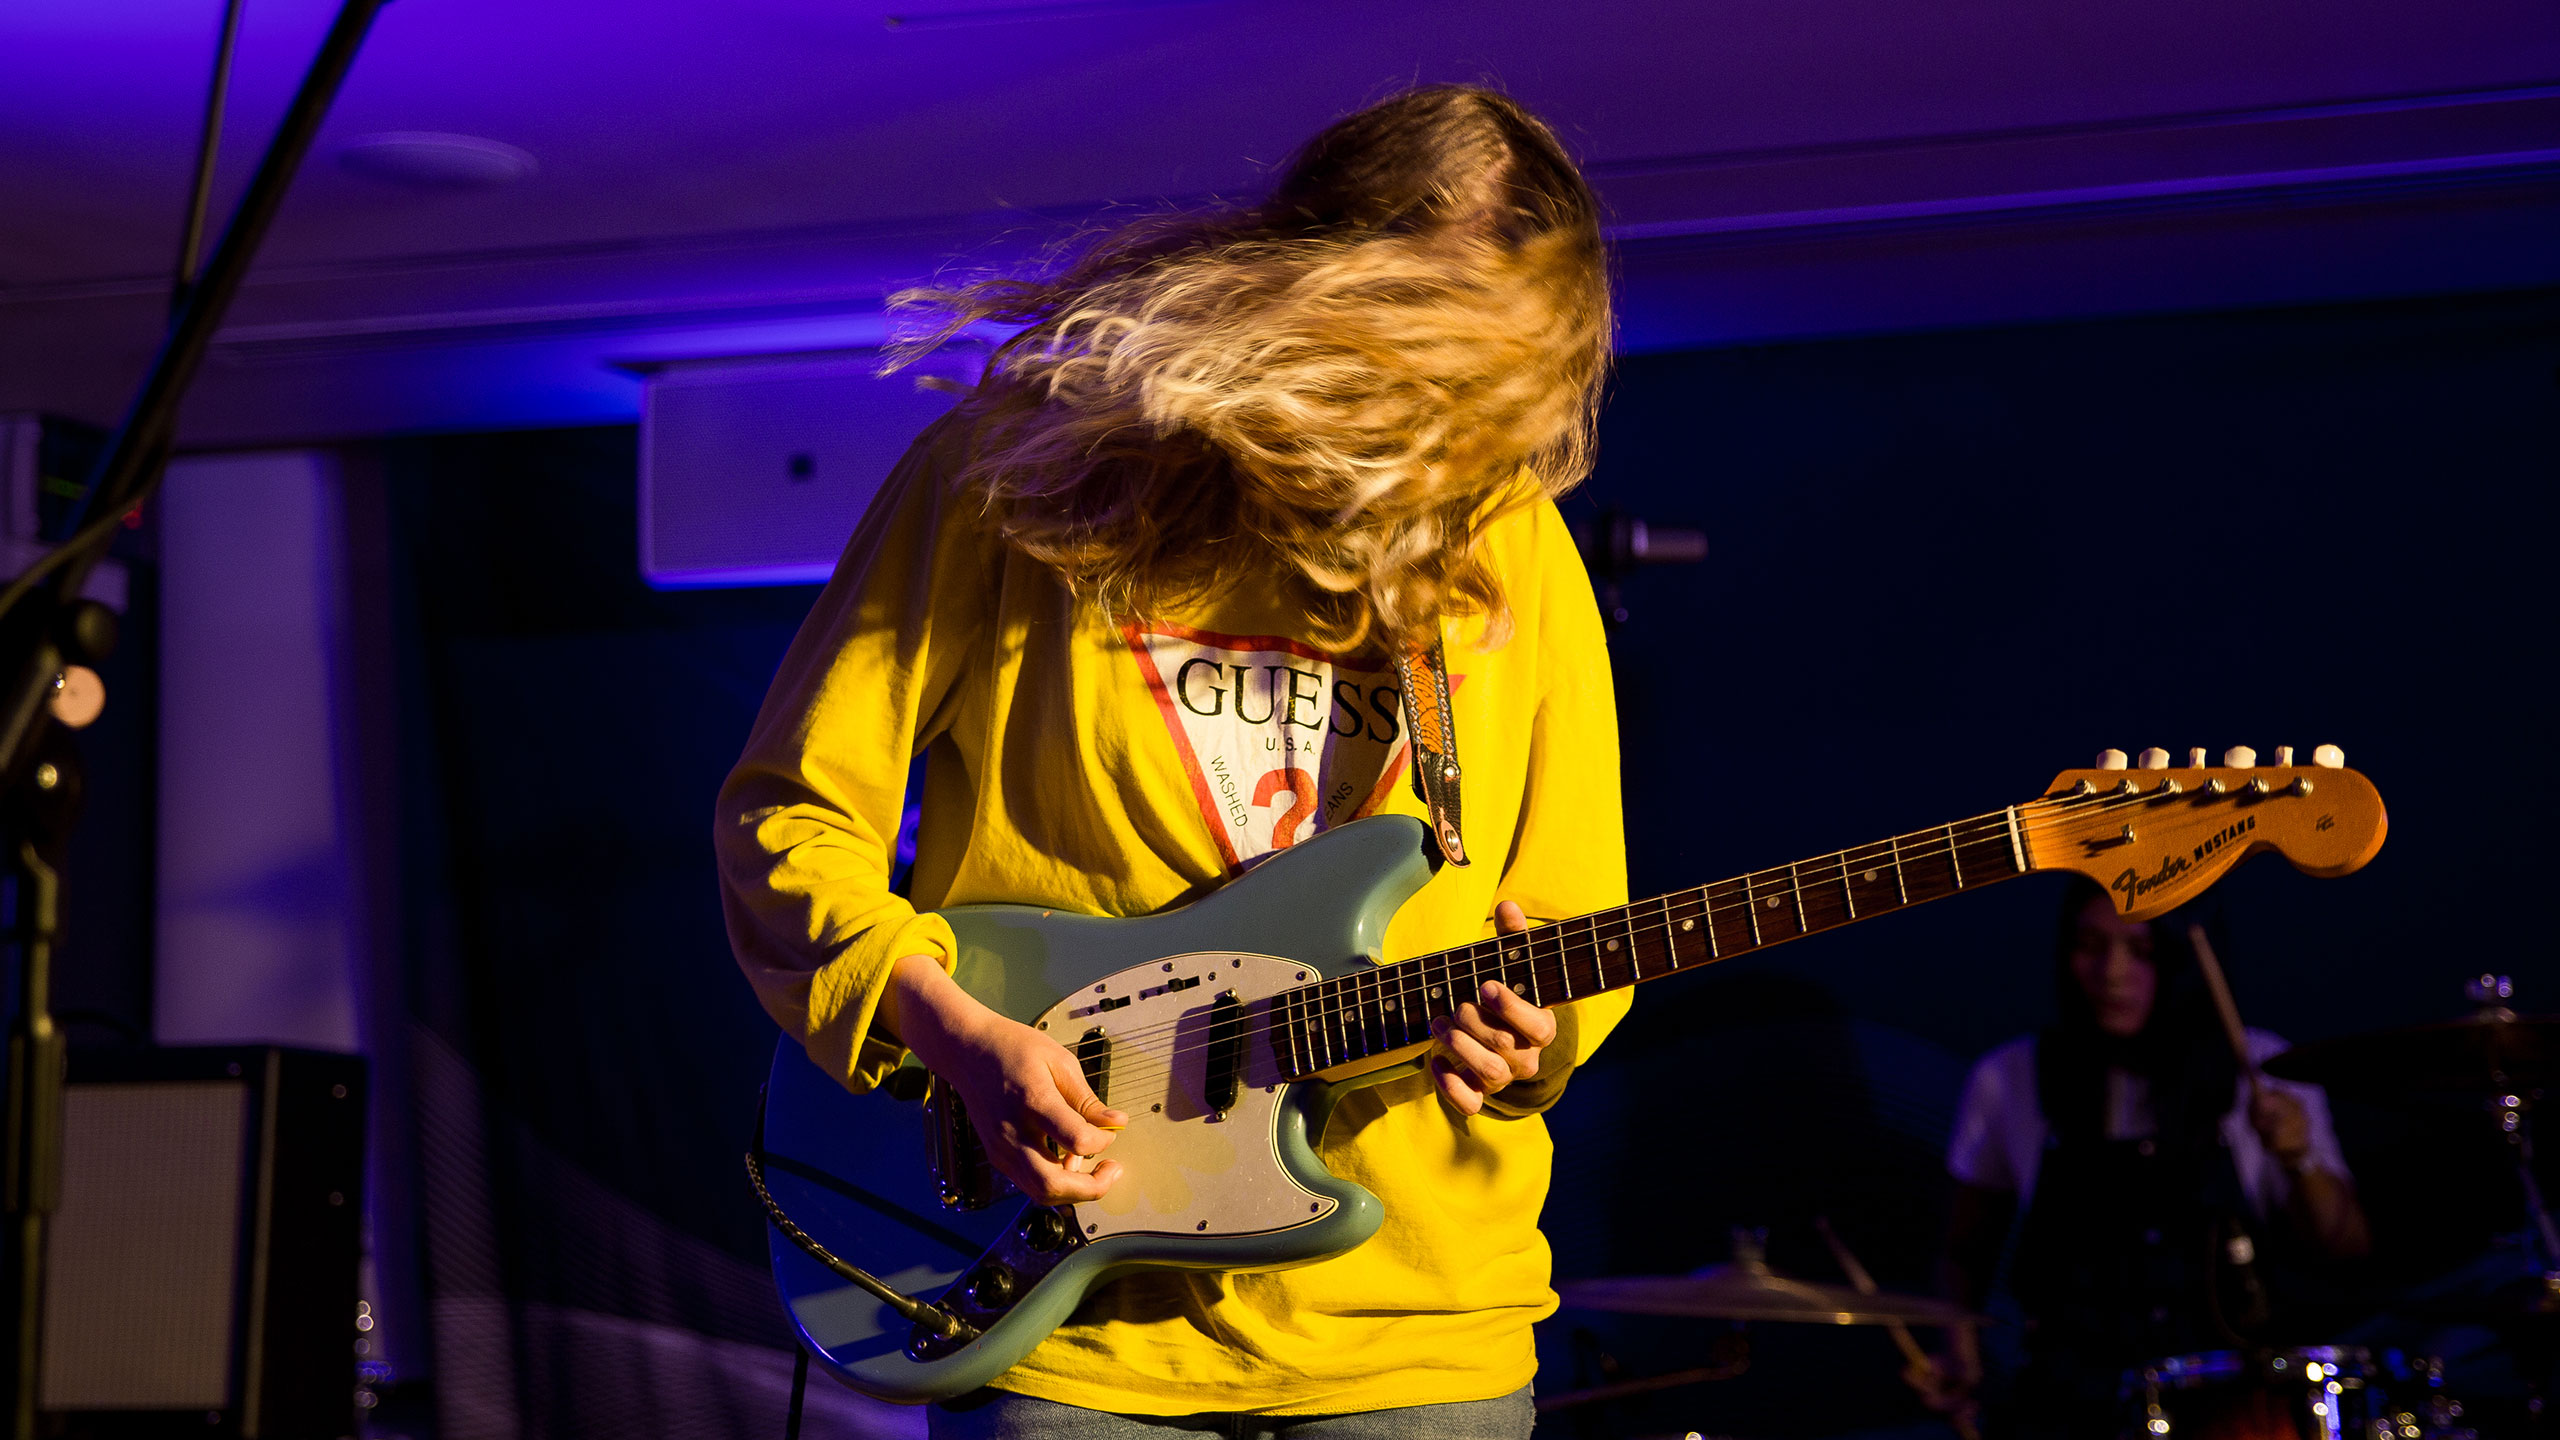 Marika Hackman swings her hair in front of her face as she plays guitar on stage at PRS for Music Presents